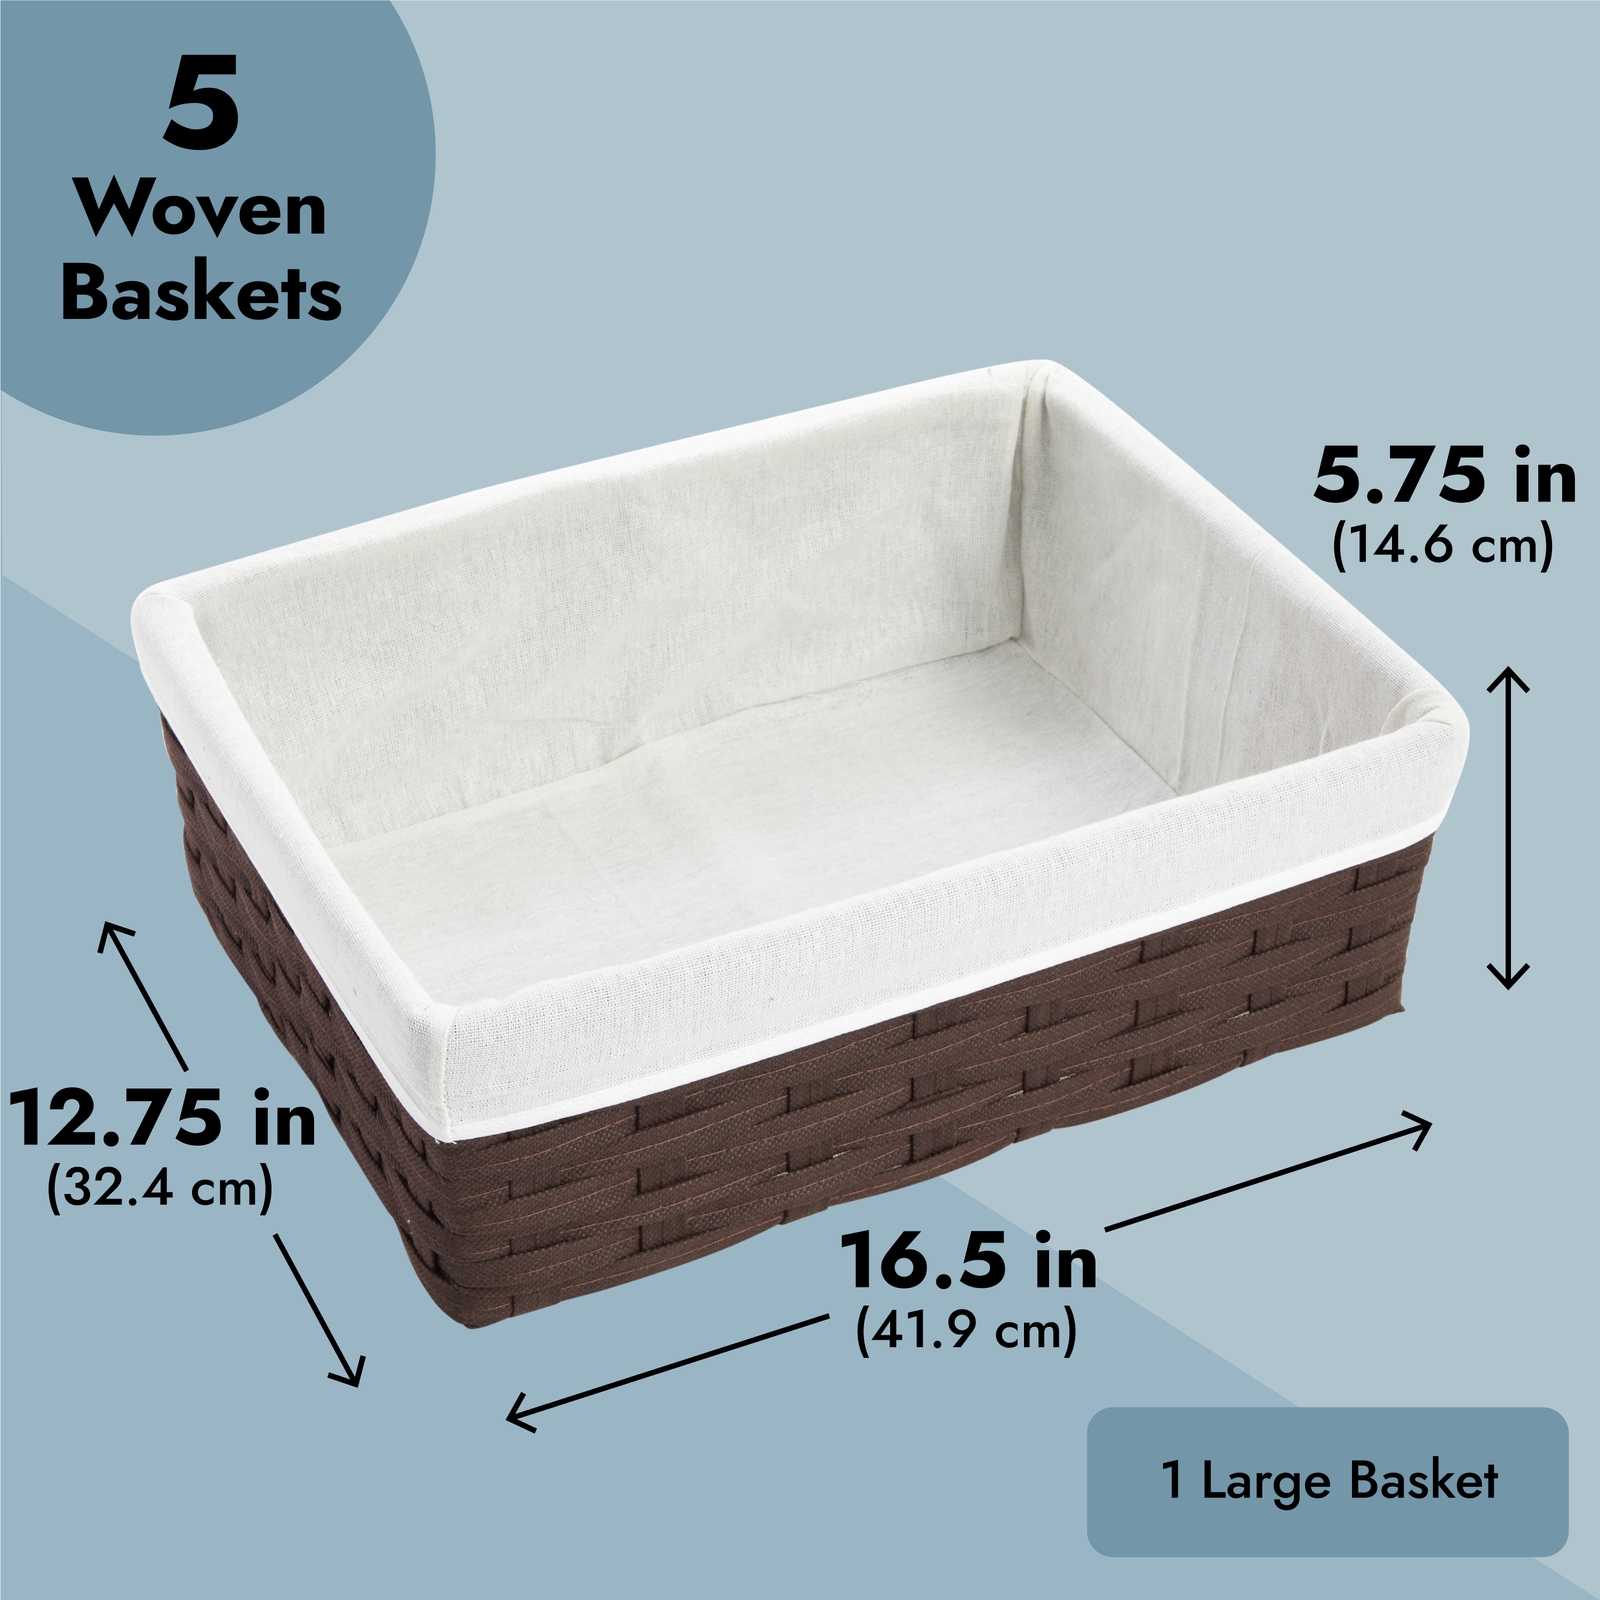 5 Pack Wicker Nesting Baskets with Cloth Lining for Pantry Shelves, Rectangular Storage Bins for Organizing Closet (Brown, 3 Sizes) - image 4 of 10